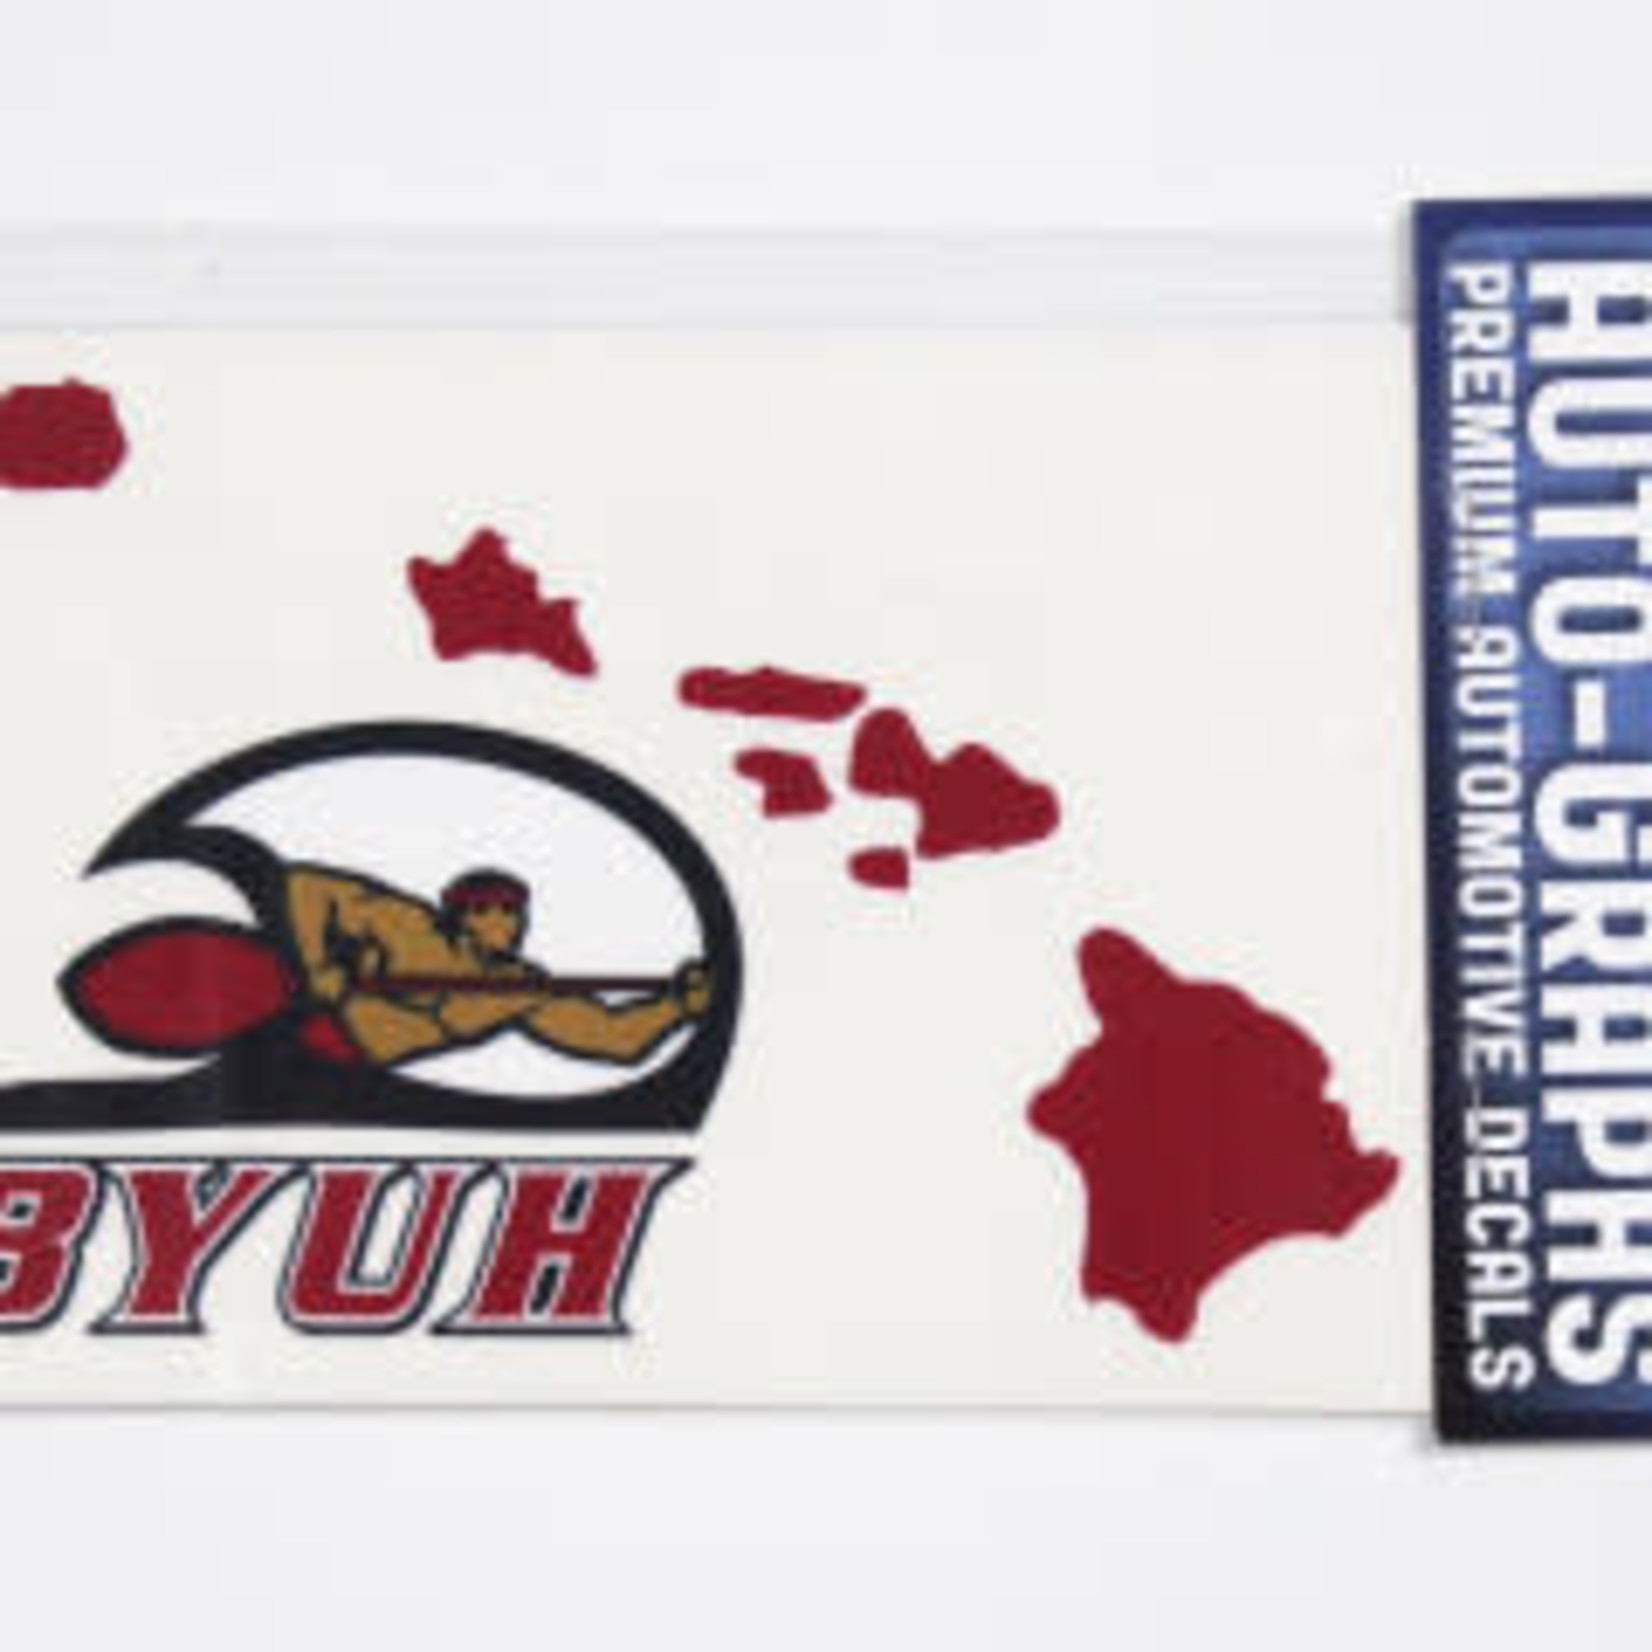 Decals BYUH Large -